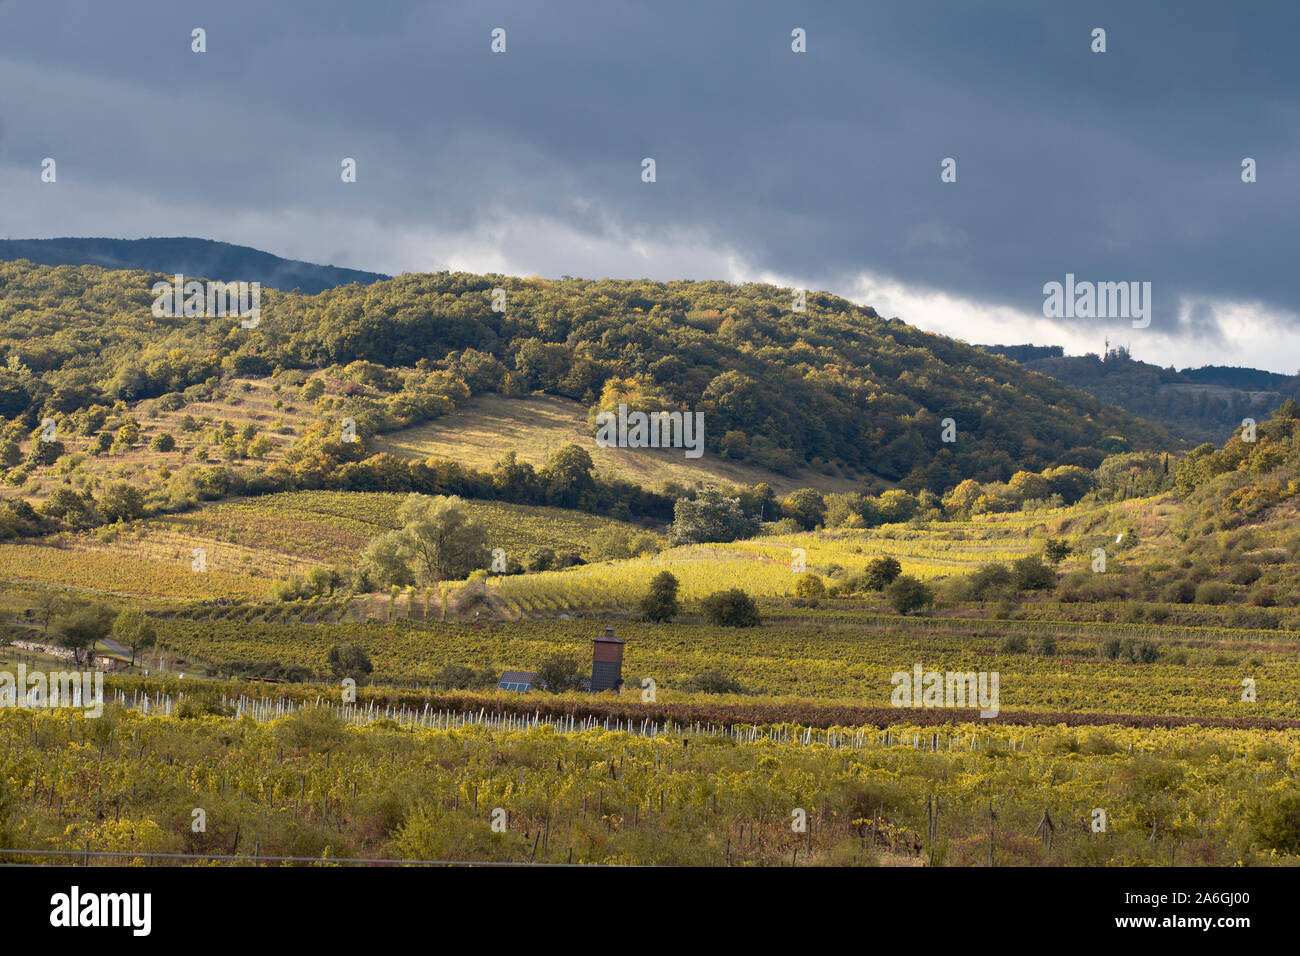 vineyard countryside on small hills Stock Photo